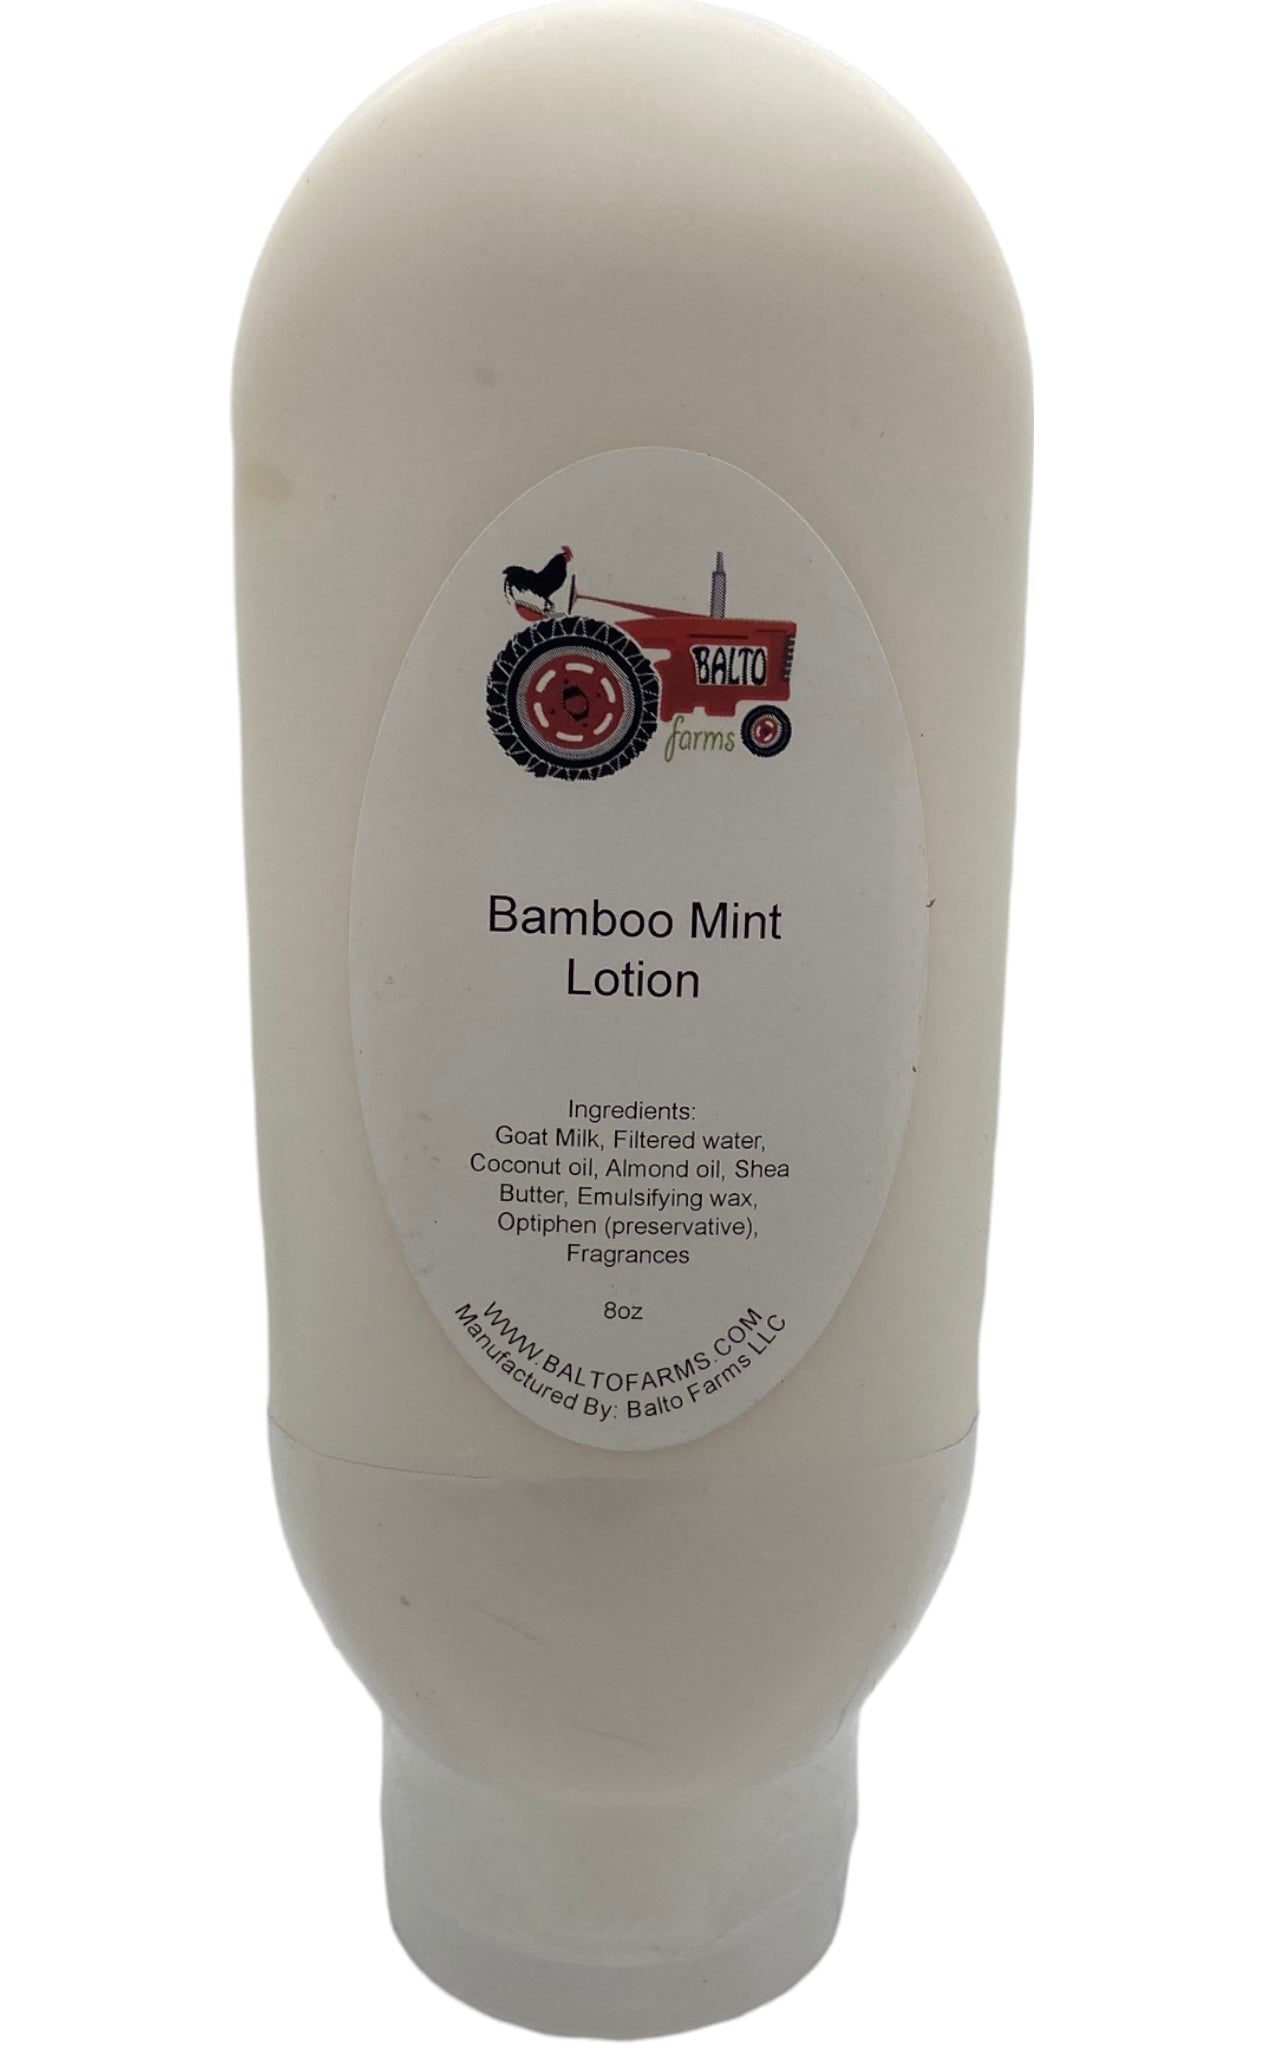 Bamboo mint lotion